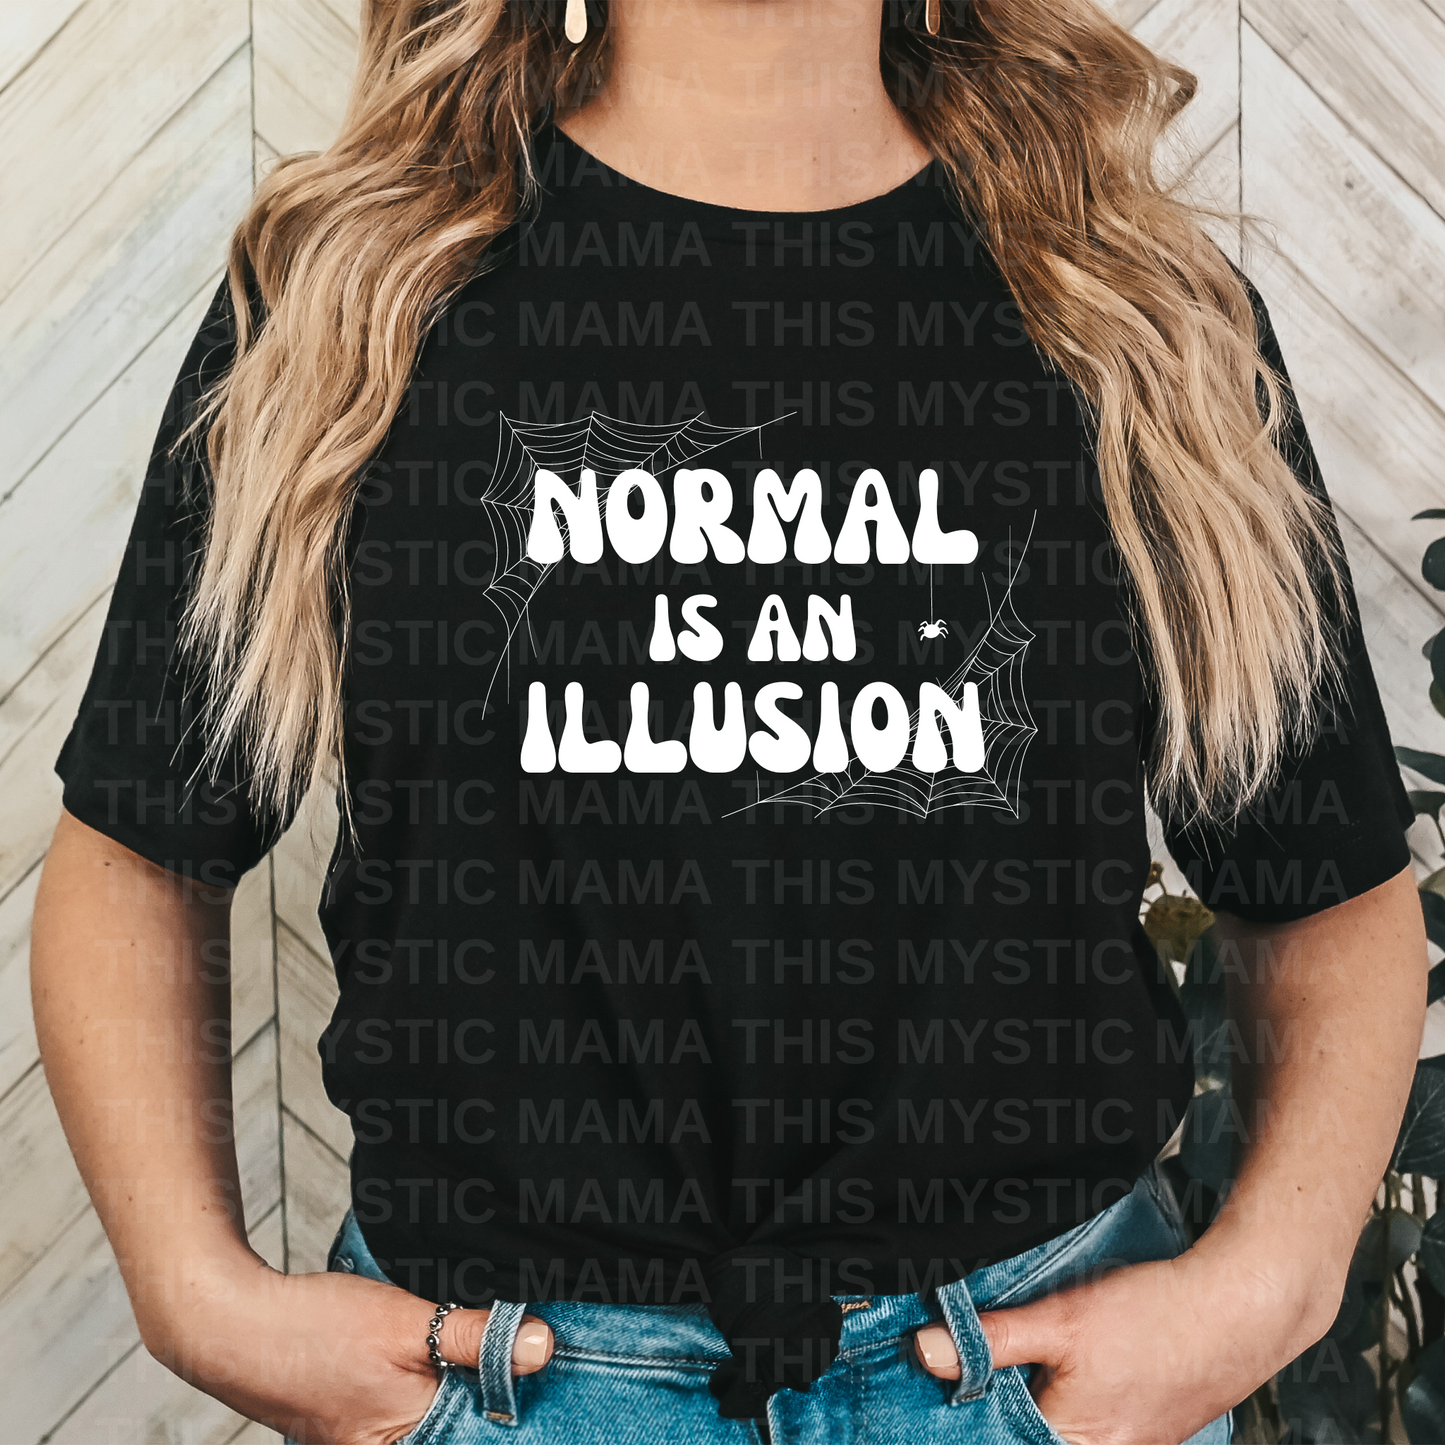 "Normal is an Illusion" Gothic Tee